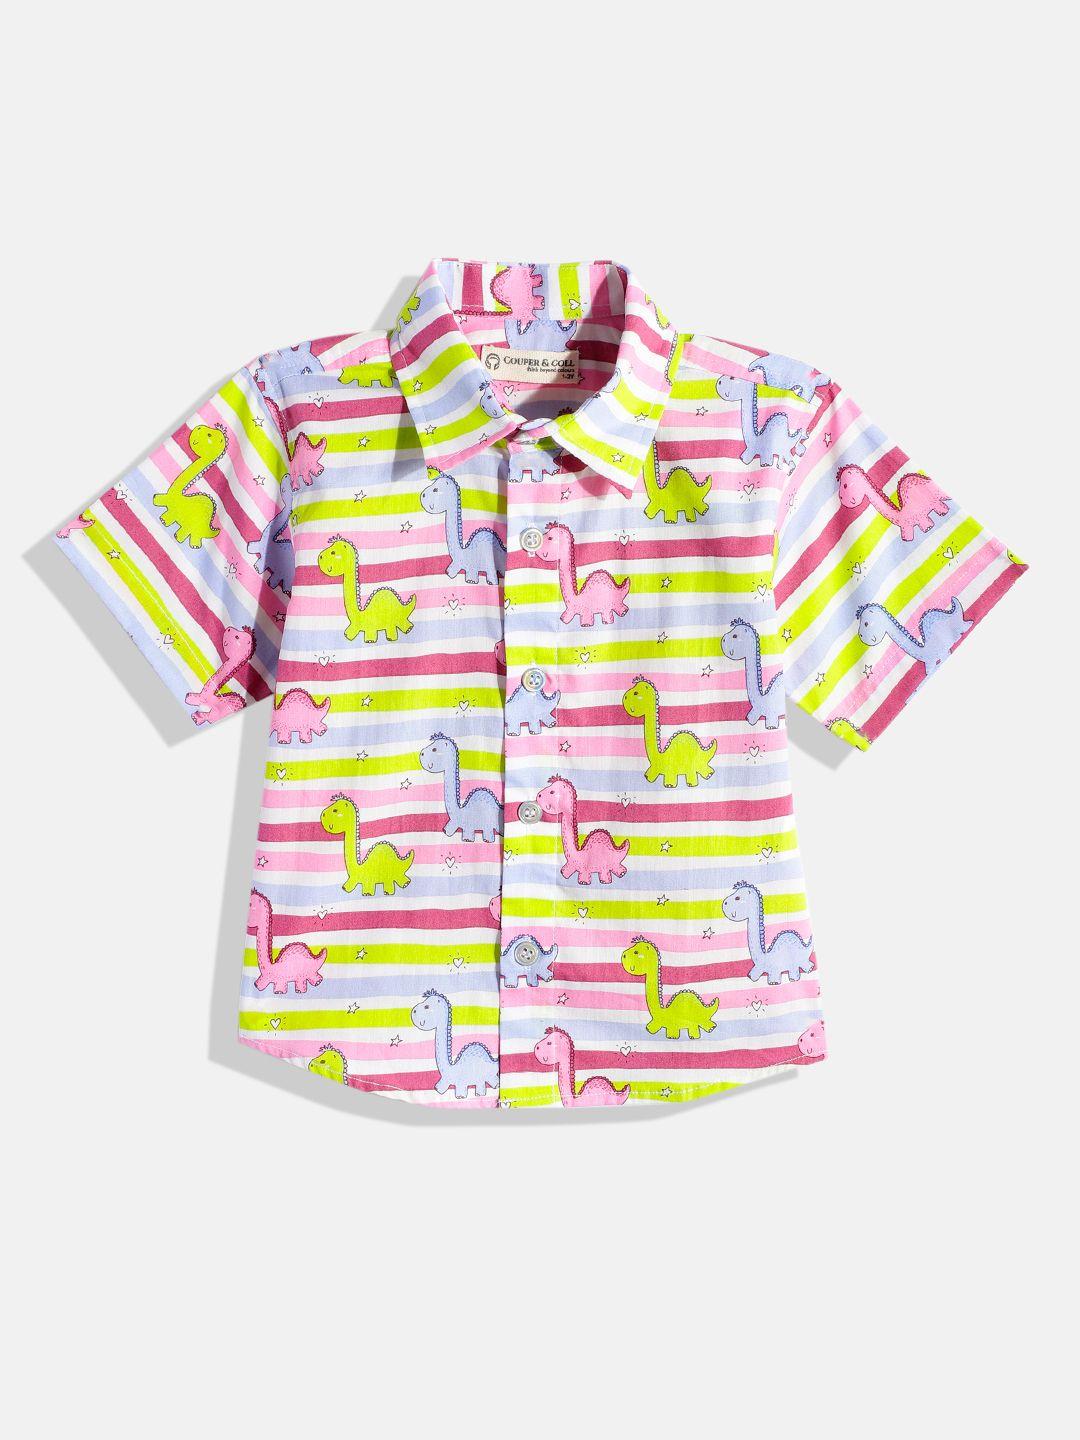 couper & coll boys pink pure cotton premium conversational printed casual shirt